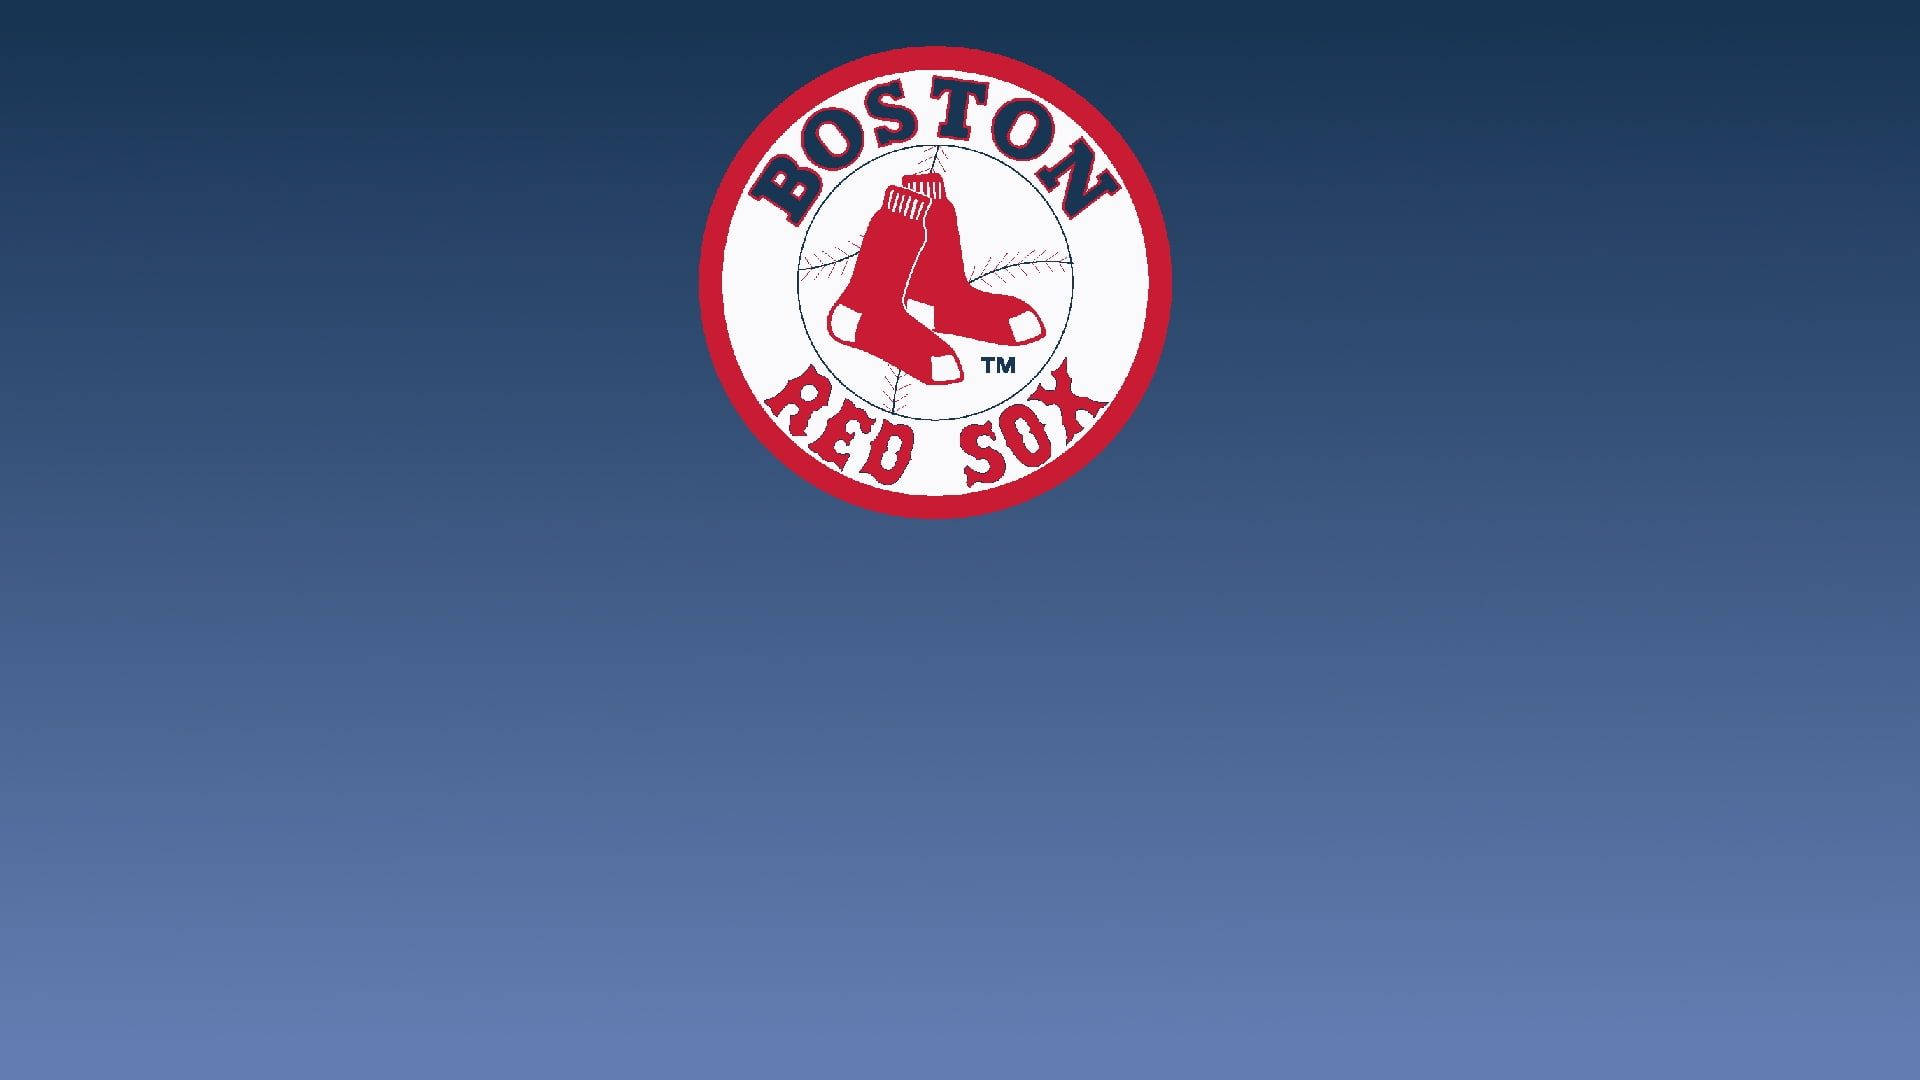 Cool Boston Red Sox Logo Background